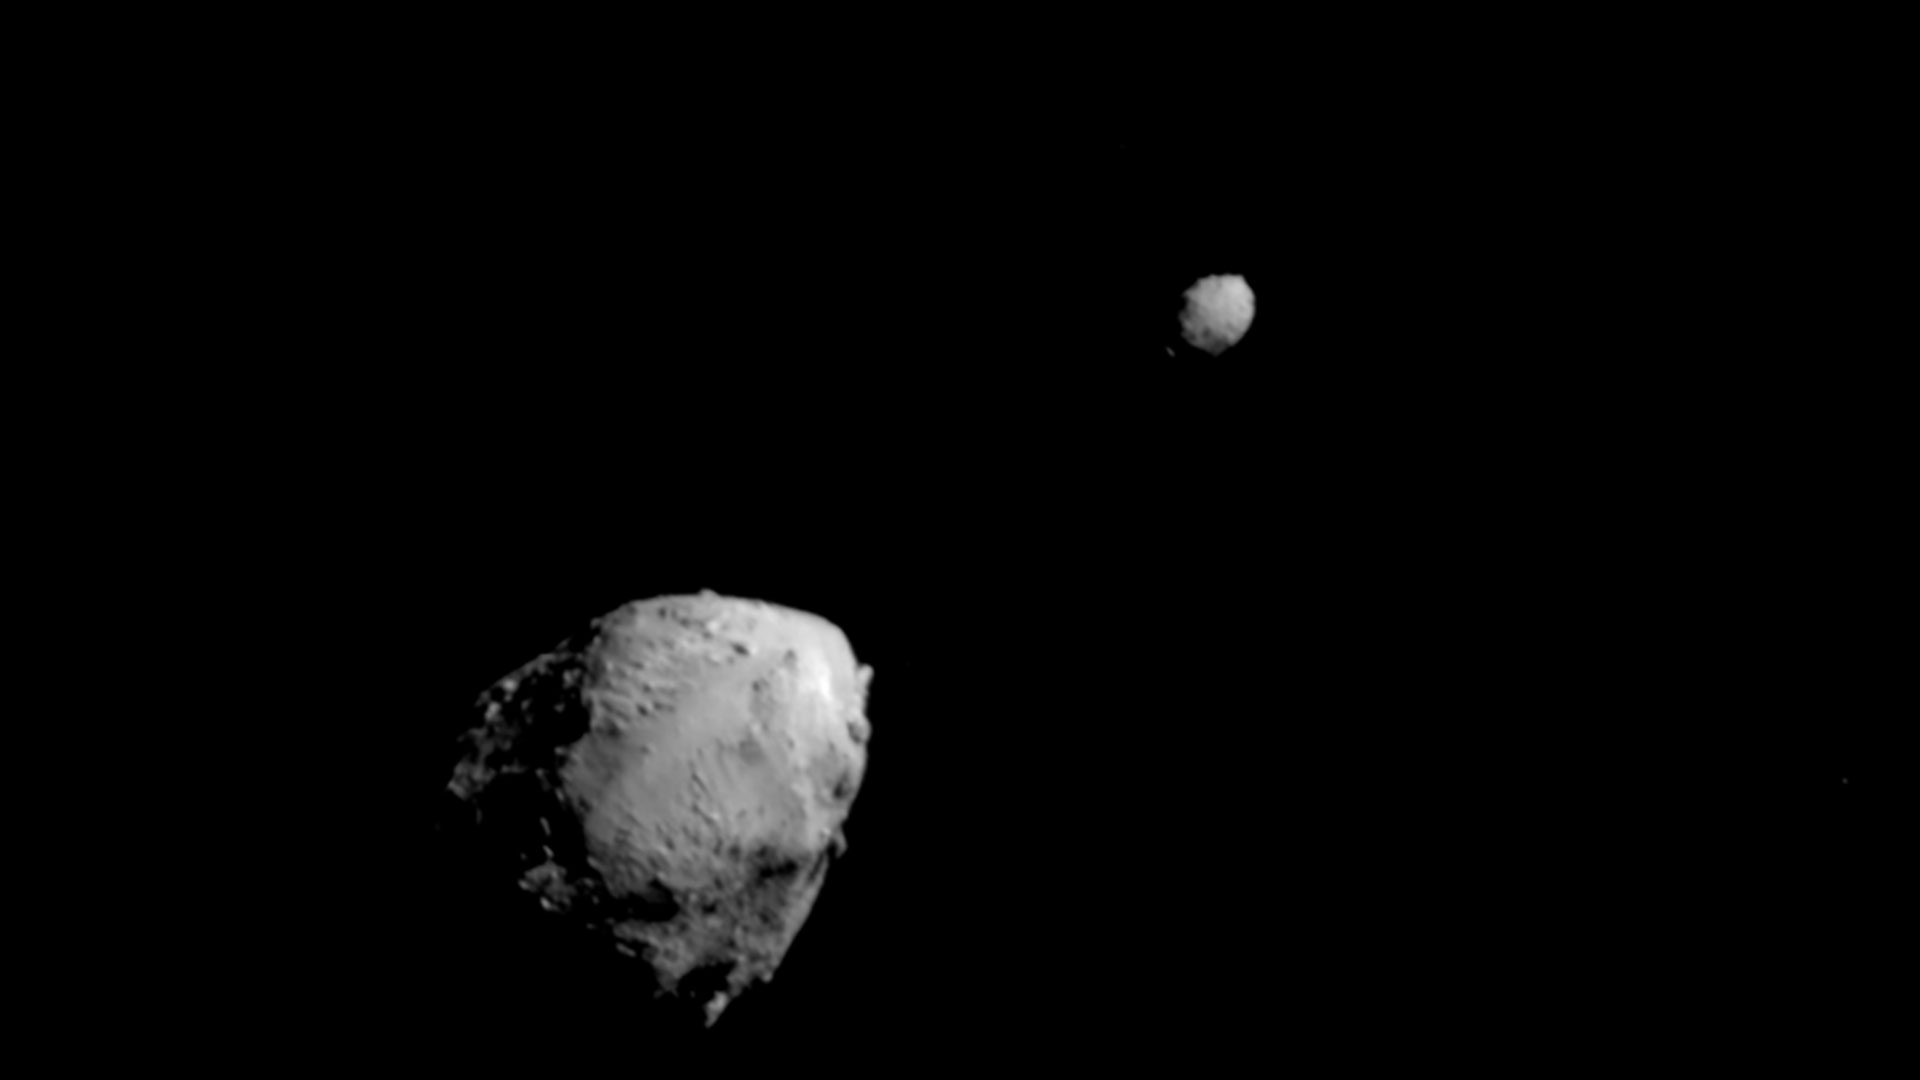 A larger asteroid on the left, and a smaller one on the right.